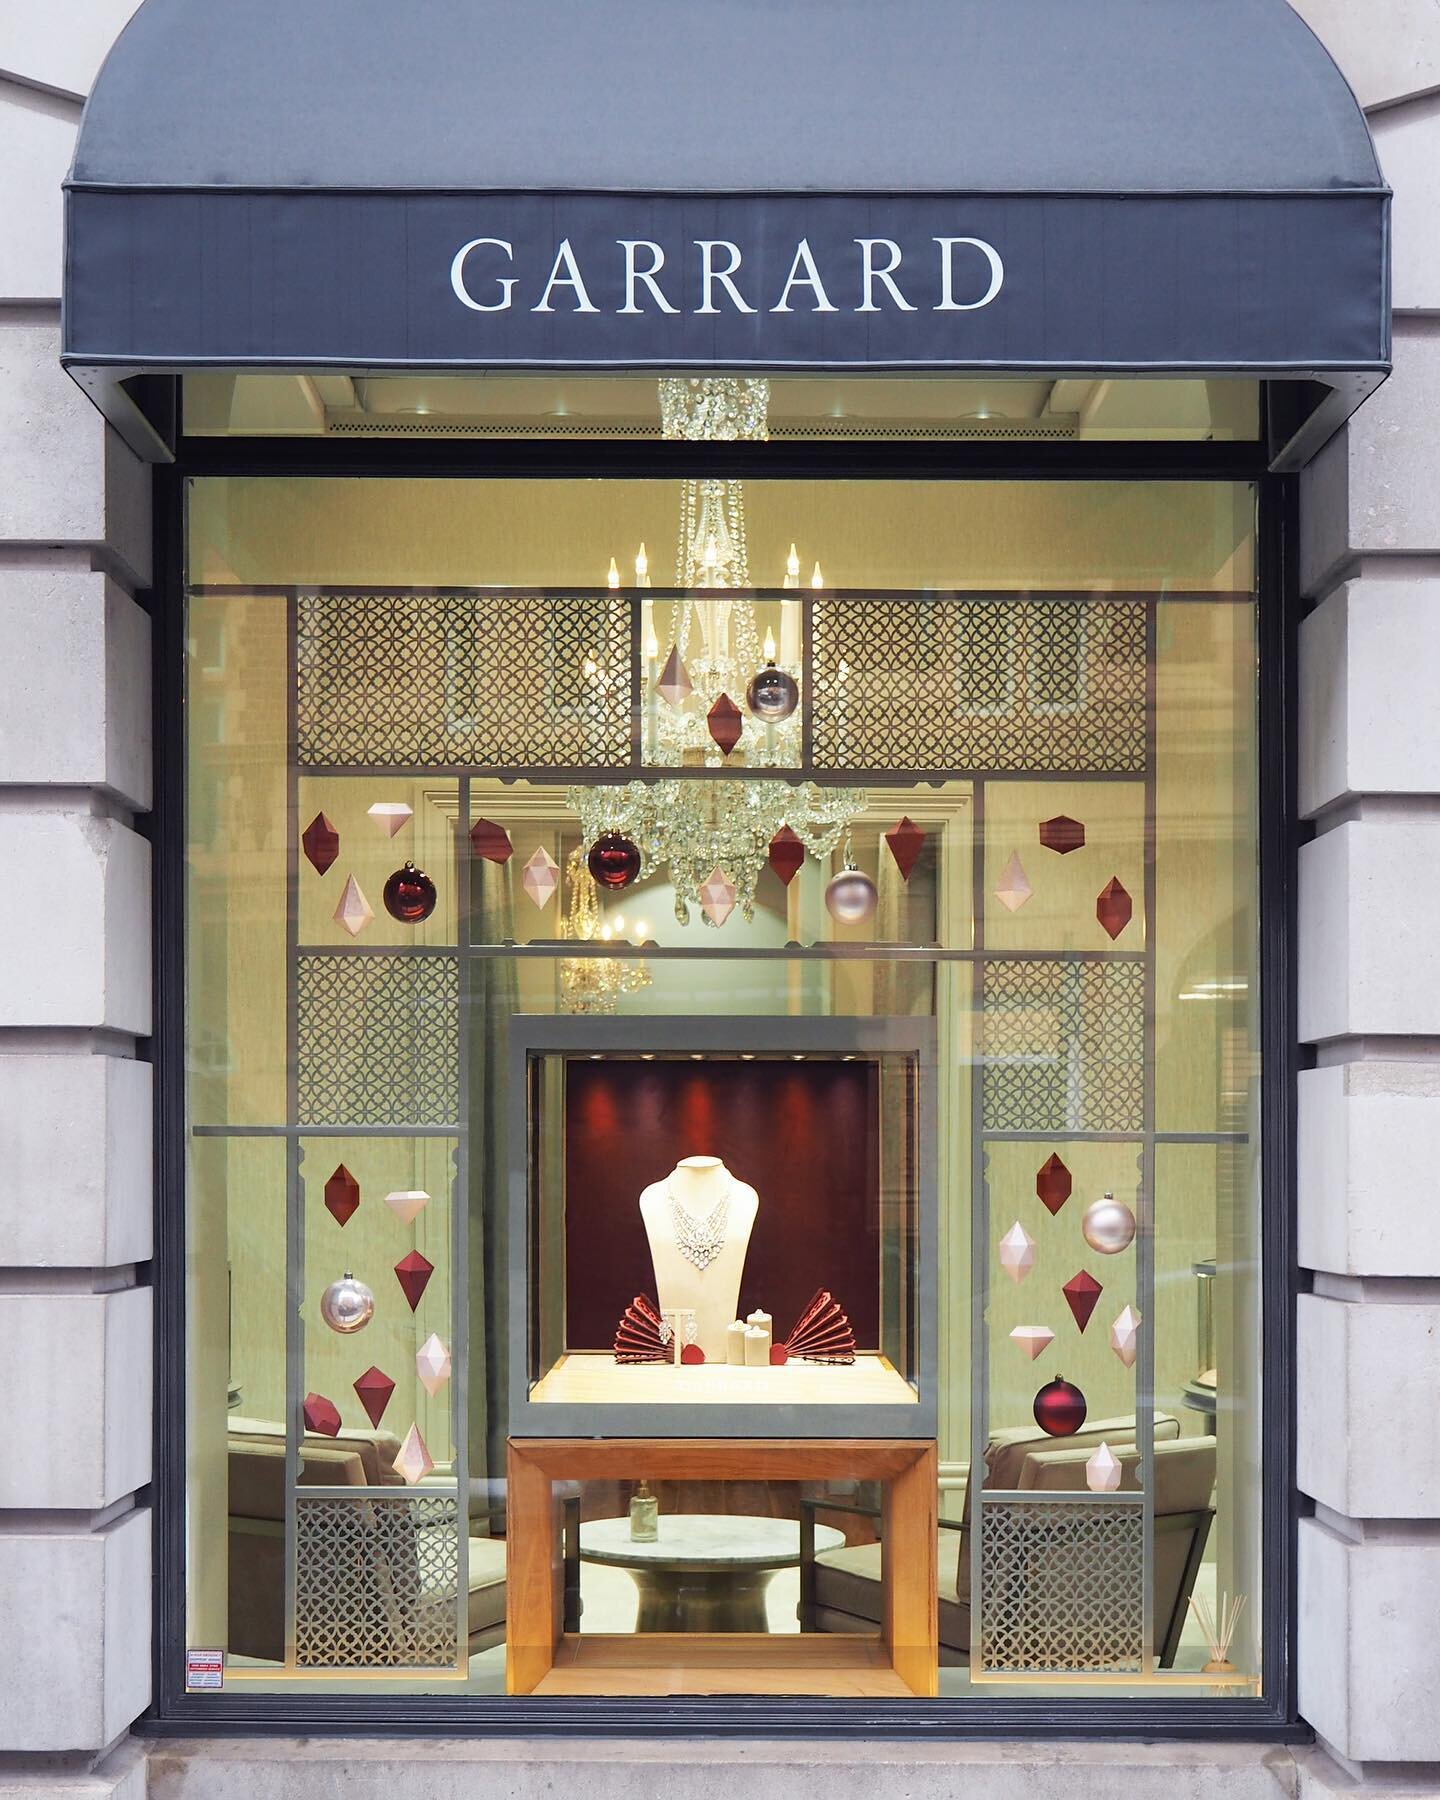 We had the pleasure of working with House of Garrard on the design, production and installation of their flagship Christmas windows. The seven windows are adorned with handmade paper jewels and fans inspired by the Garrard fine jewellery collections.